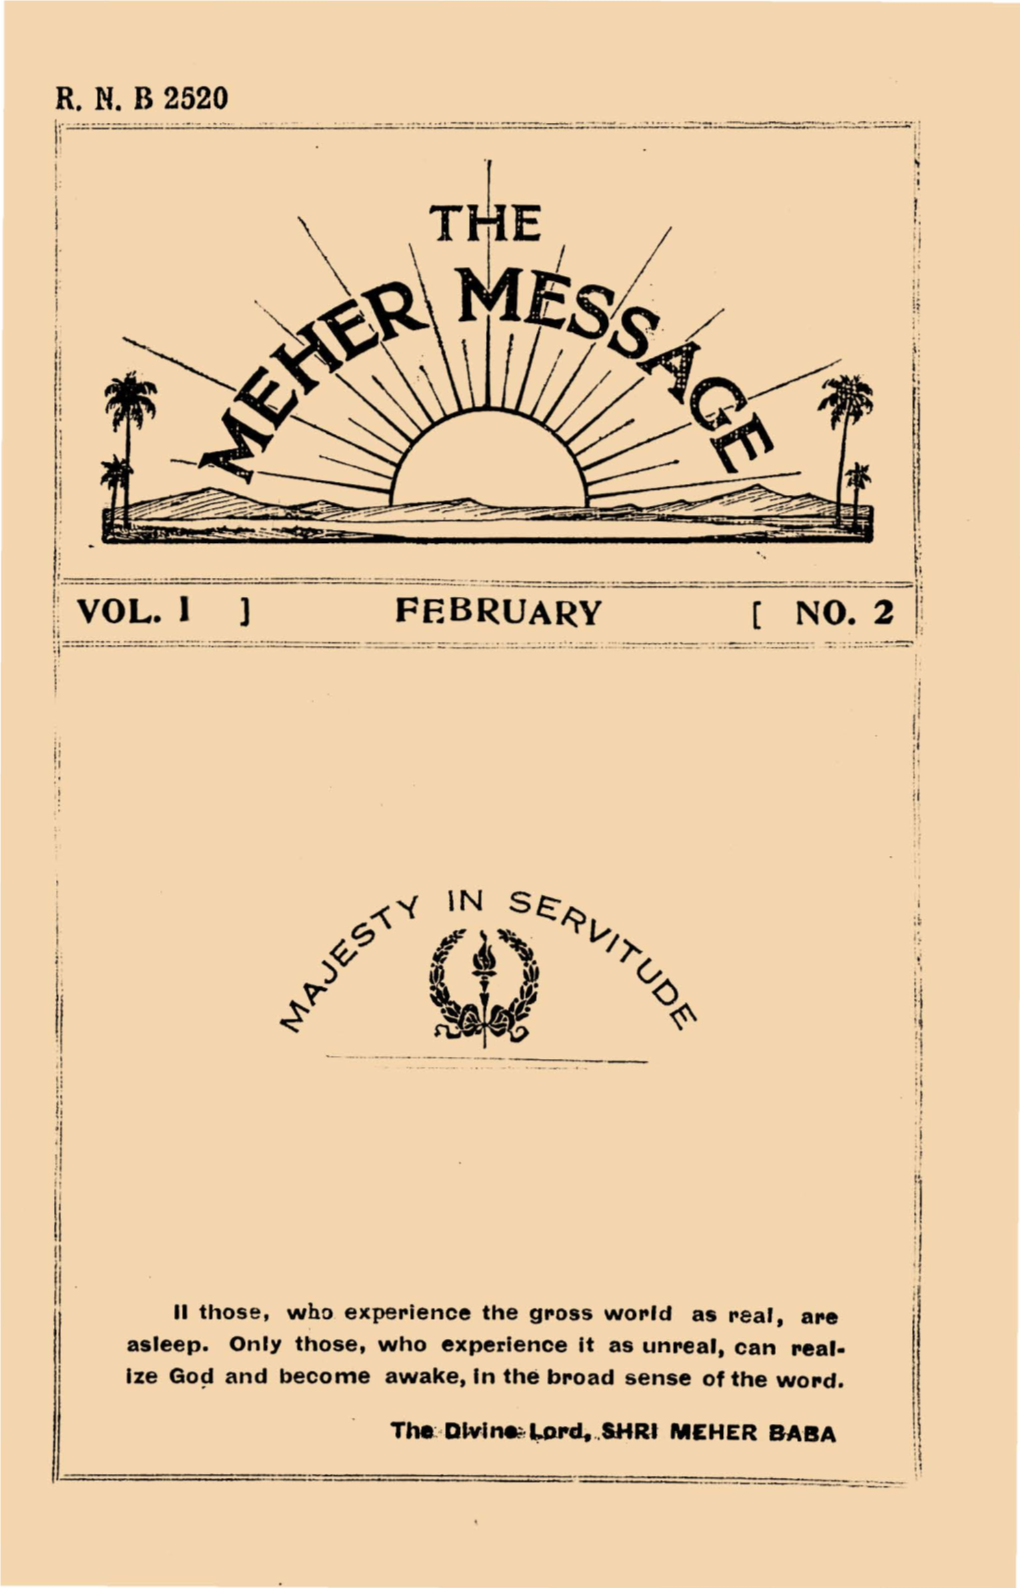 Meher Message Volume One Number